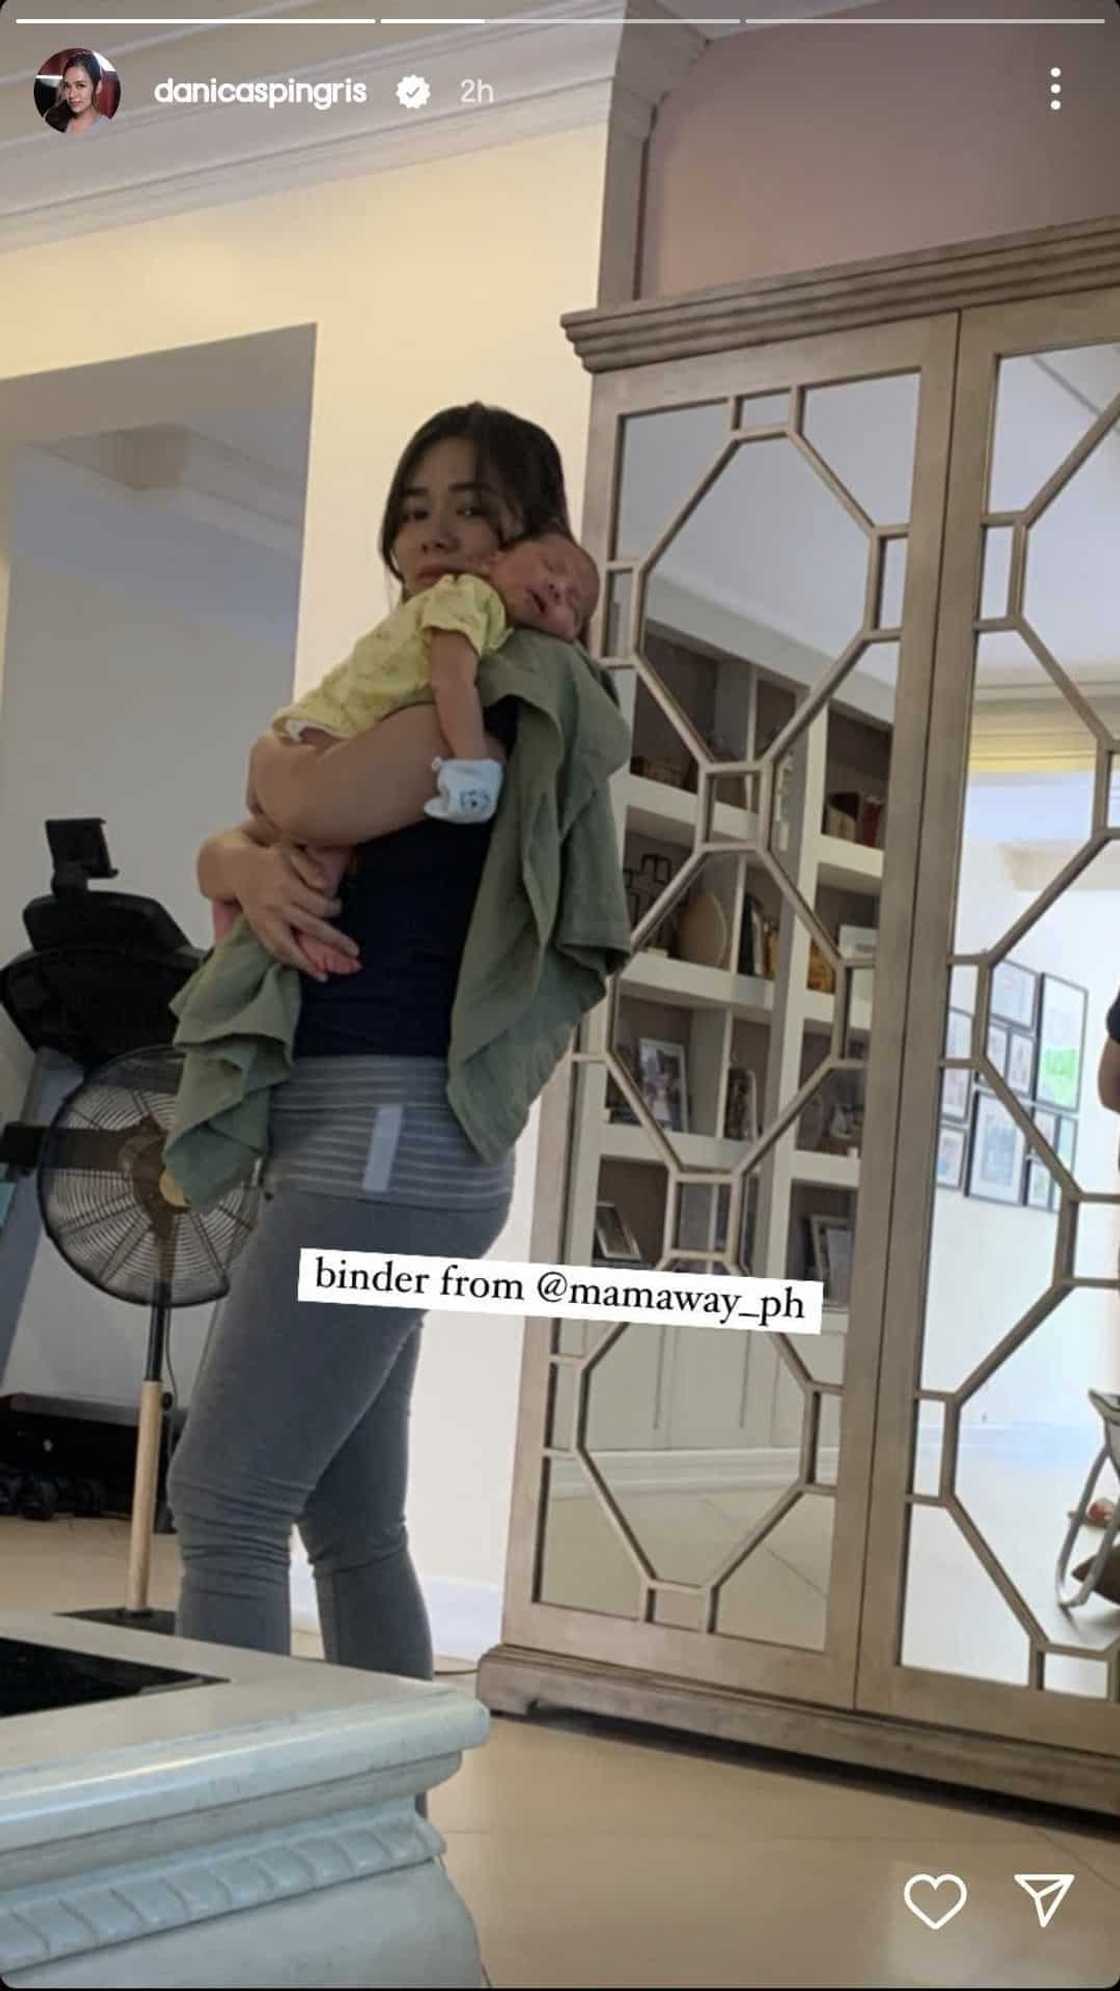 Danica Sotto shares glimpses of her mom life lately on social media